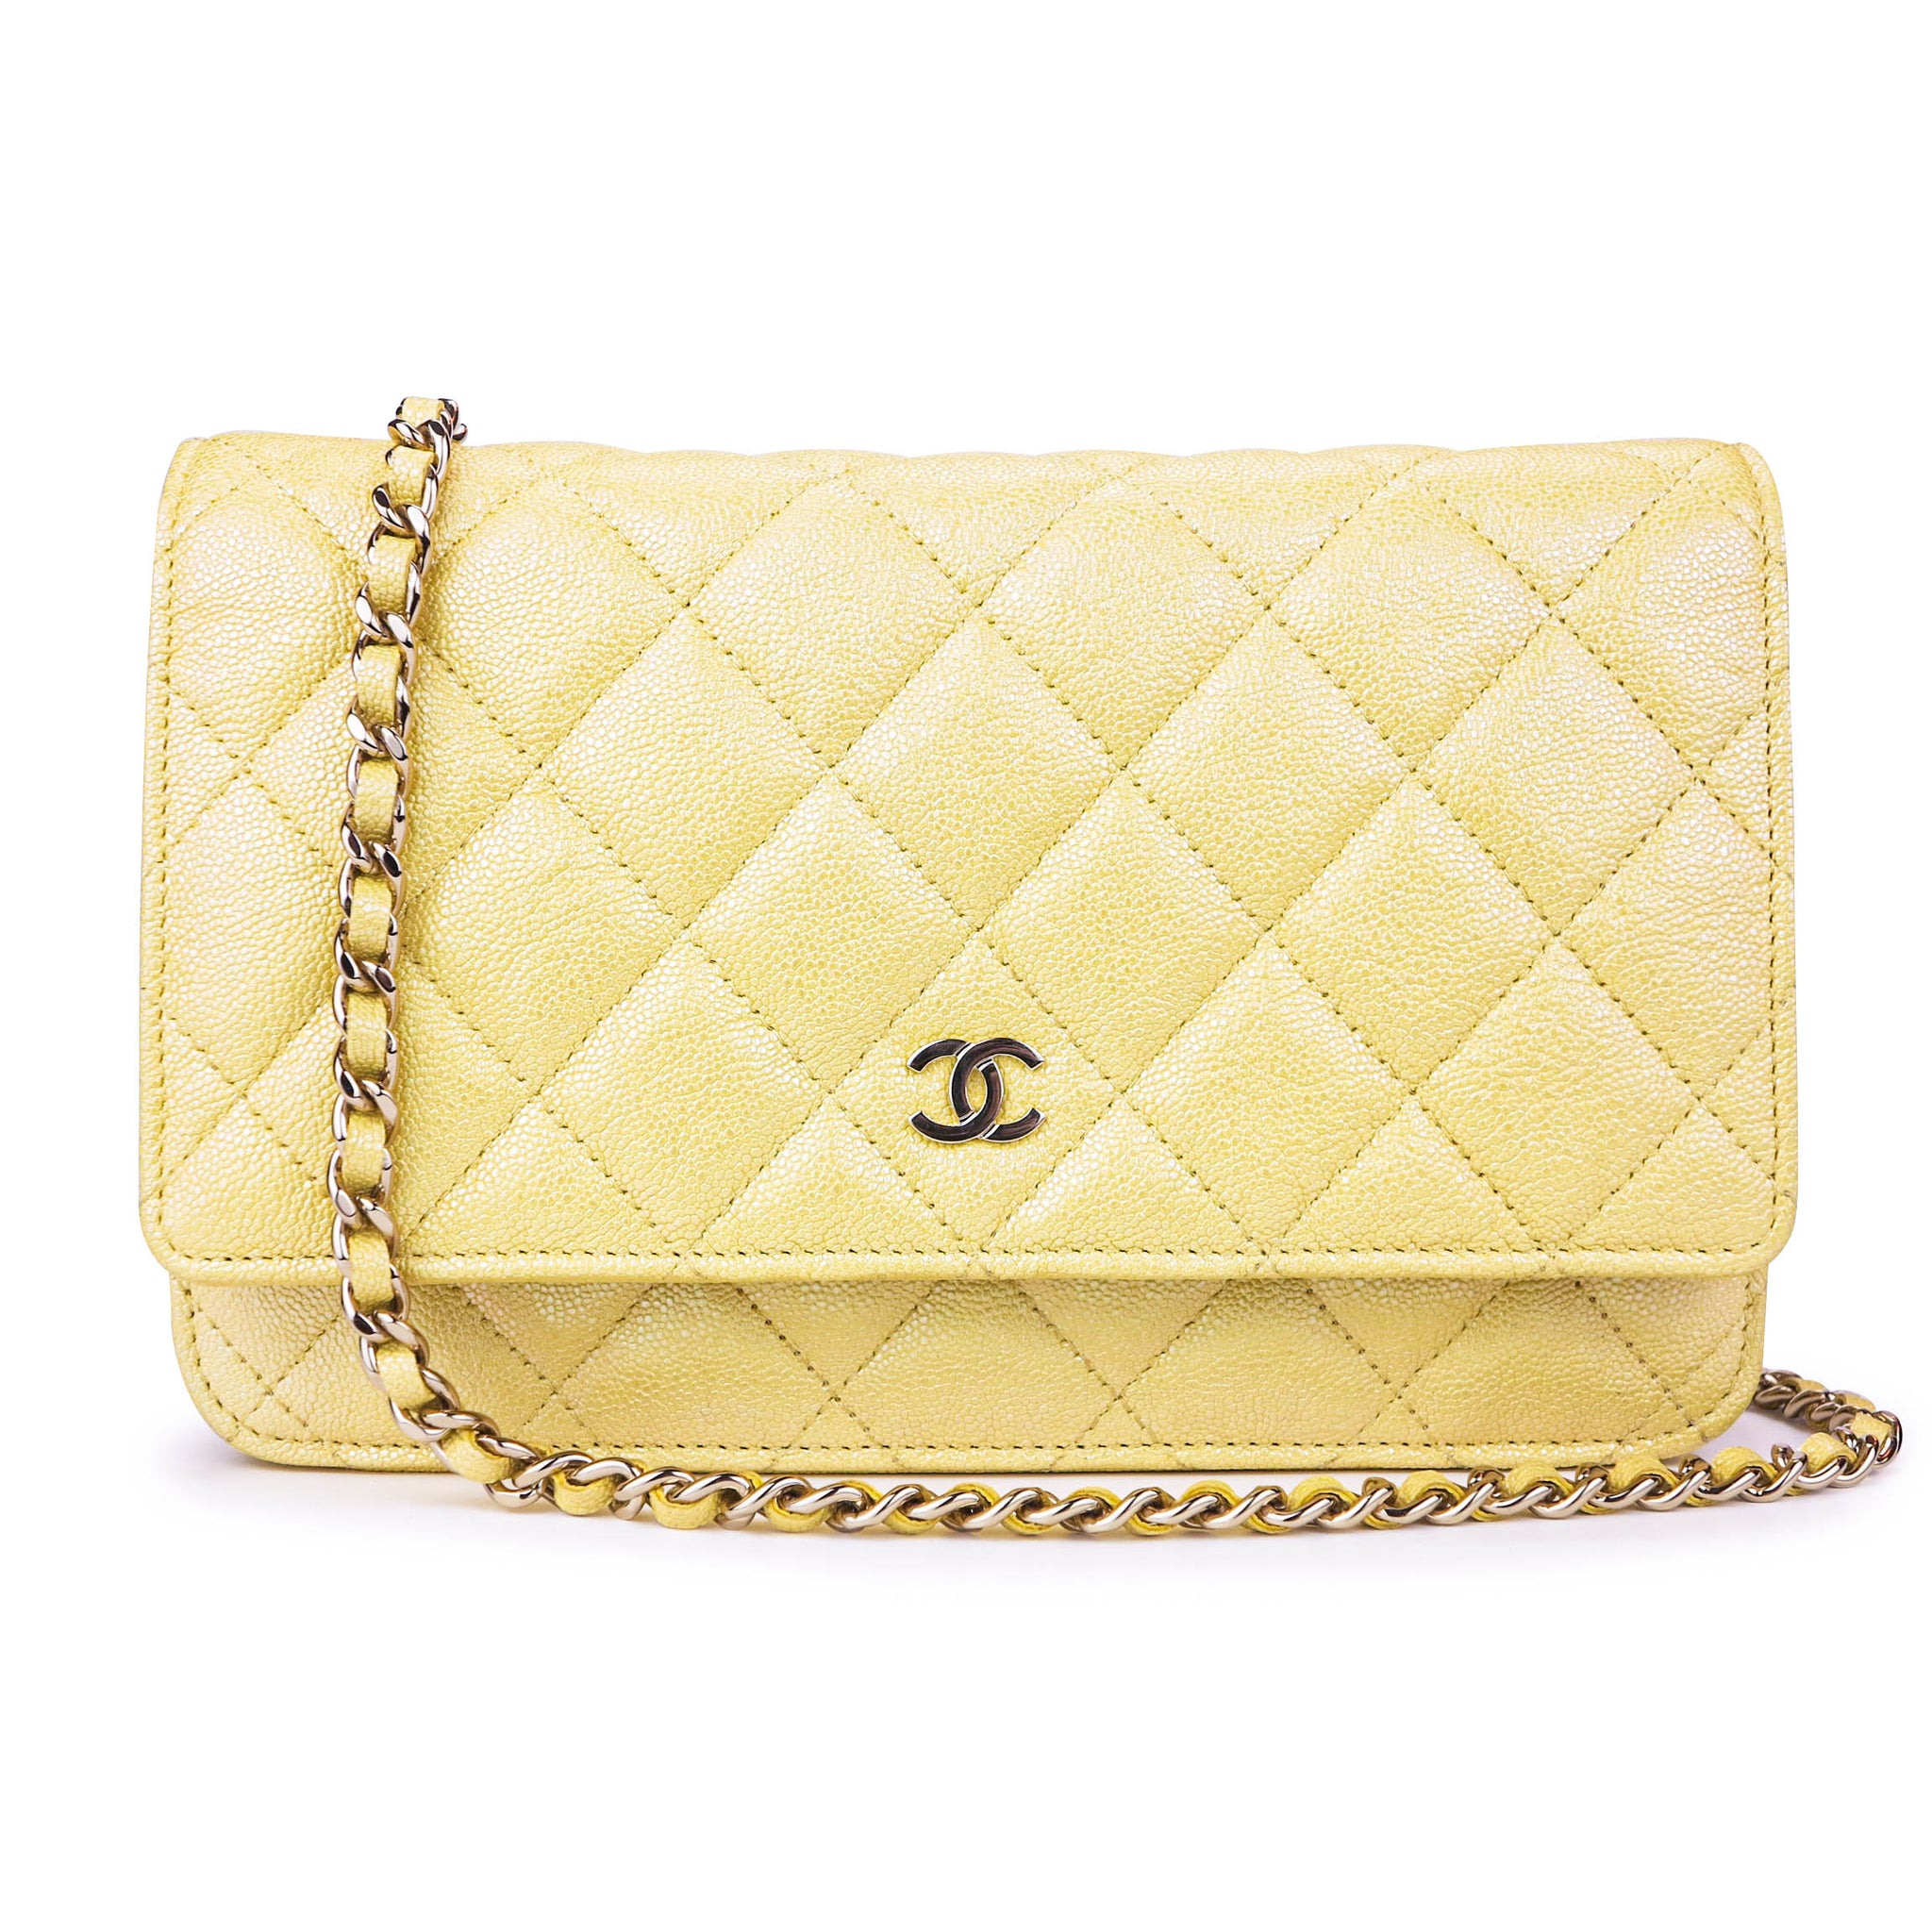 CHANEL Wallet On Chain WOC in 19S Iridescent Yellow Caviar | Dearluxe